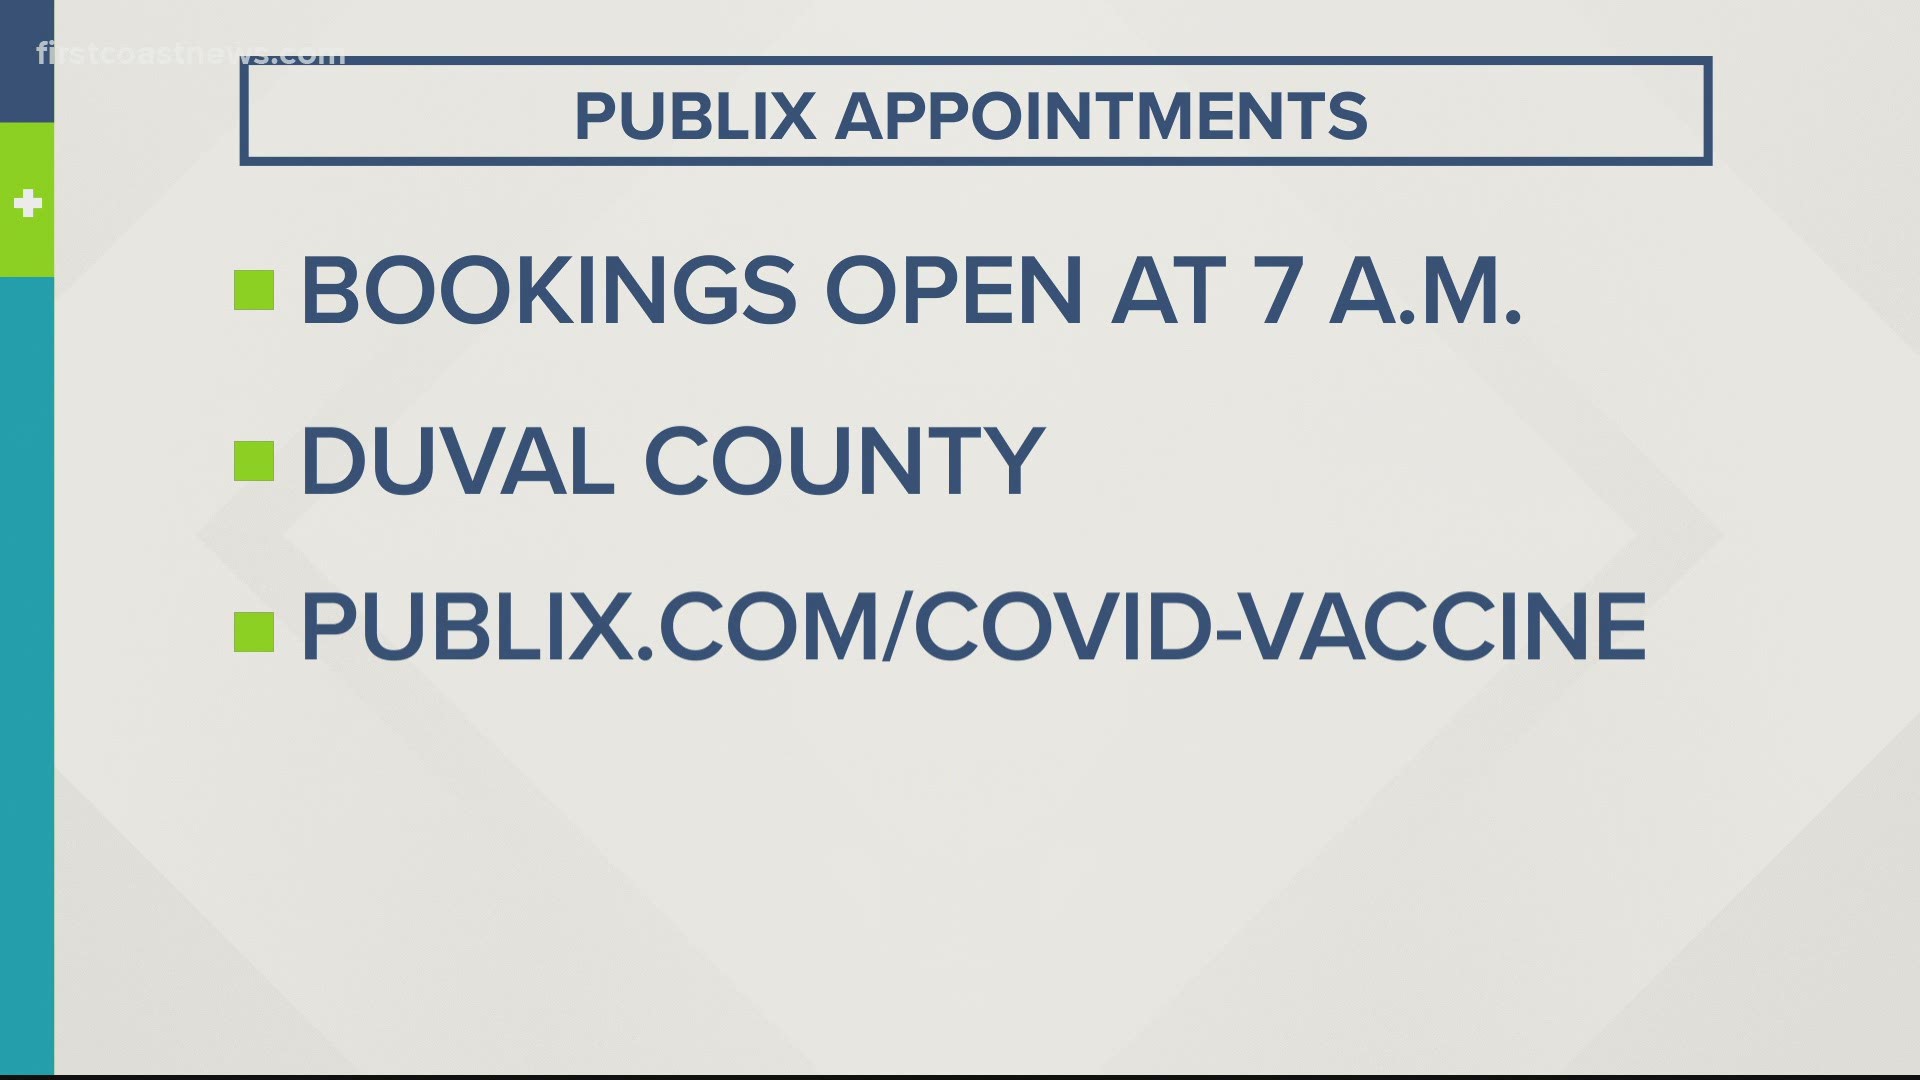 The appointments will be made available starting at  7 a.m. on Wednesday.